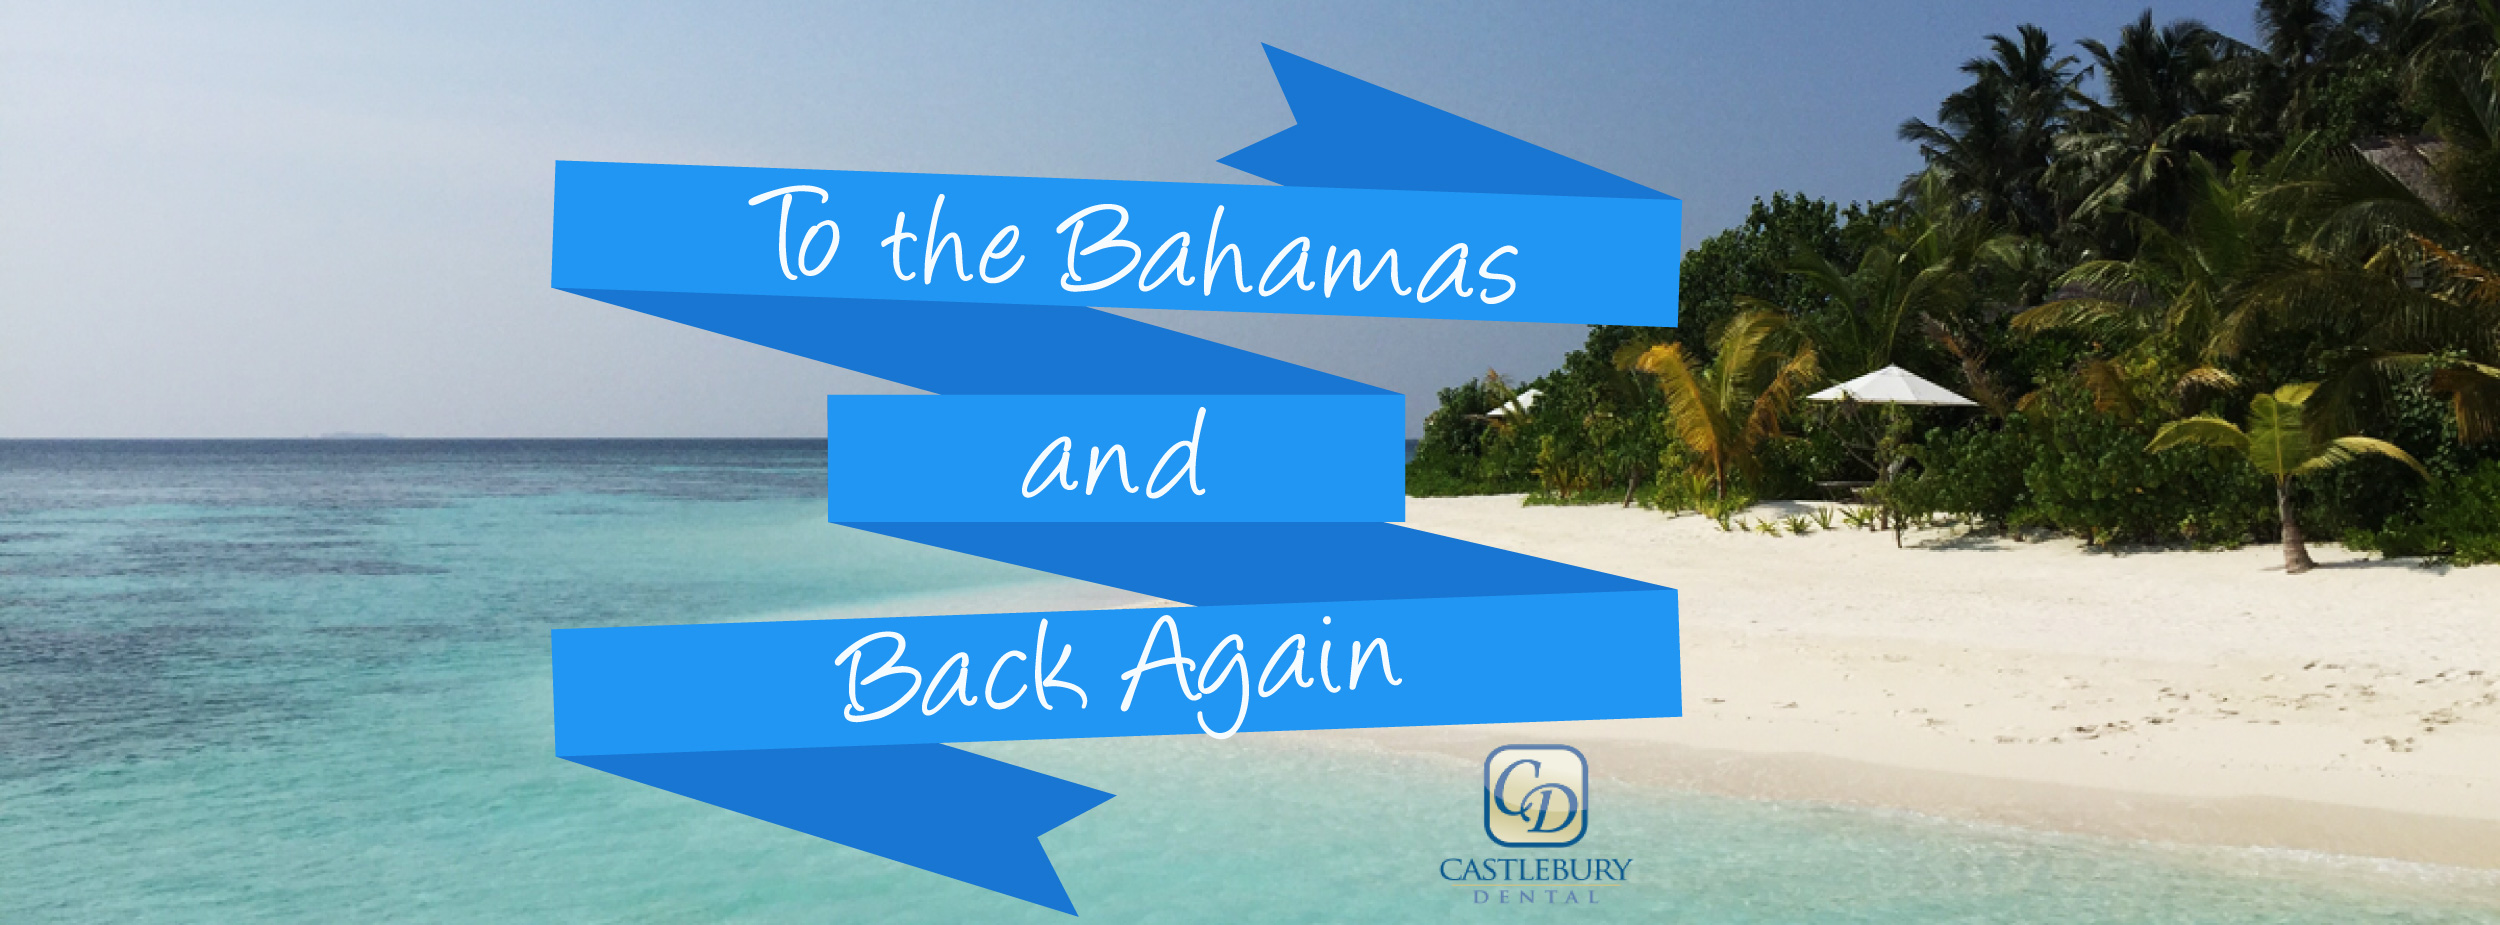 To the Bahamas and Back Again